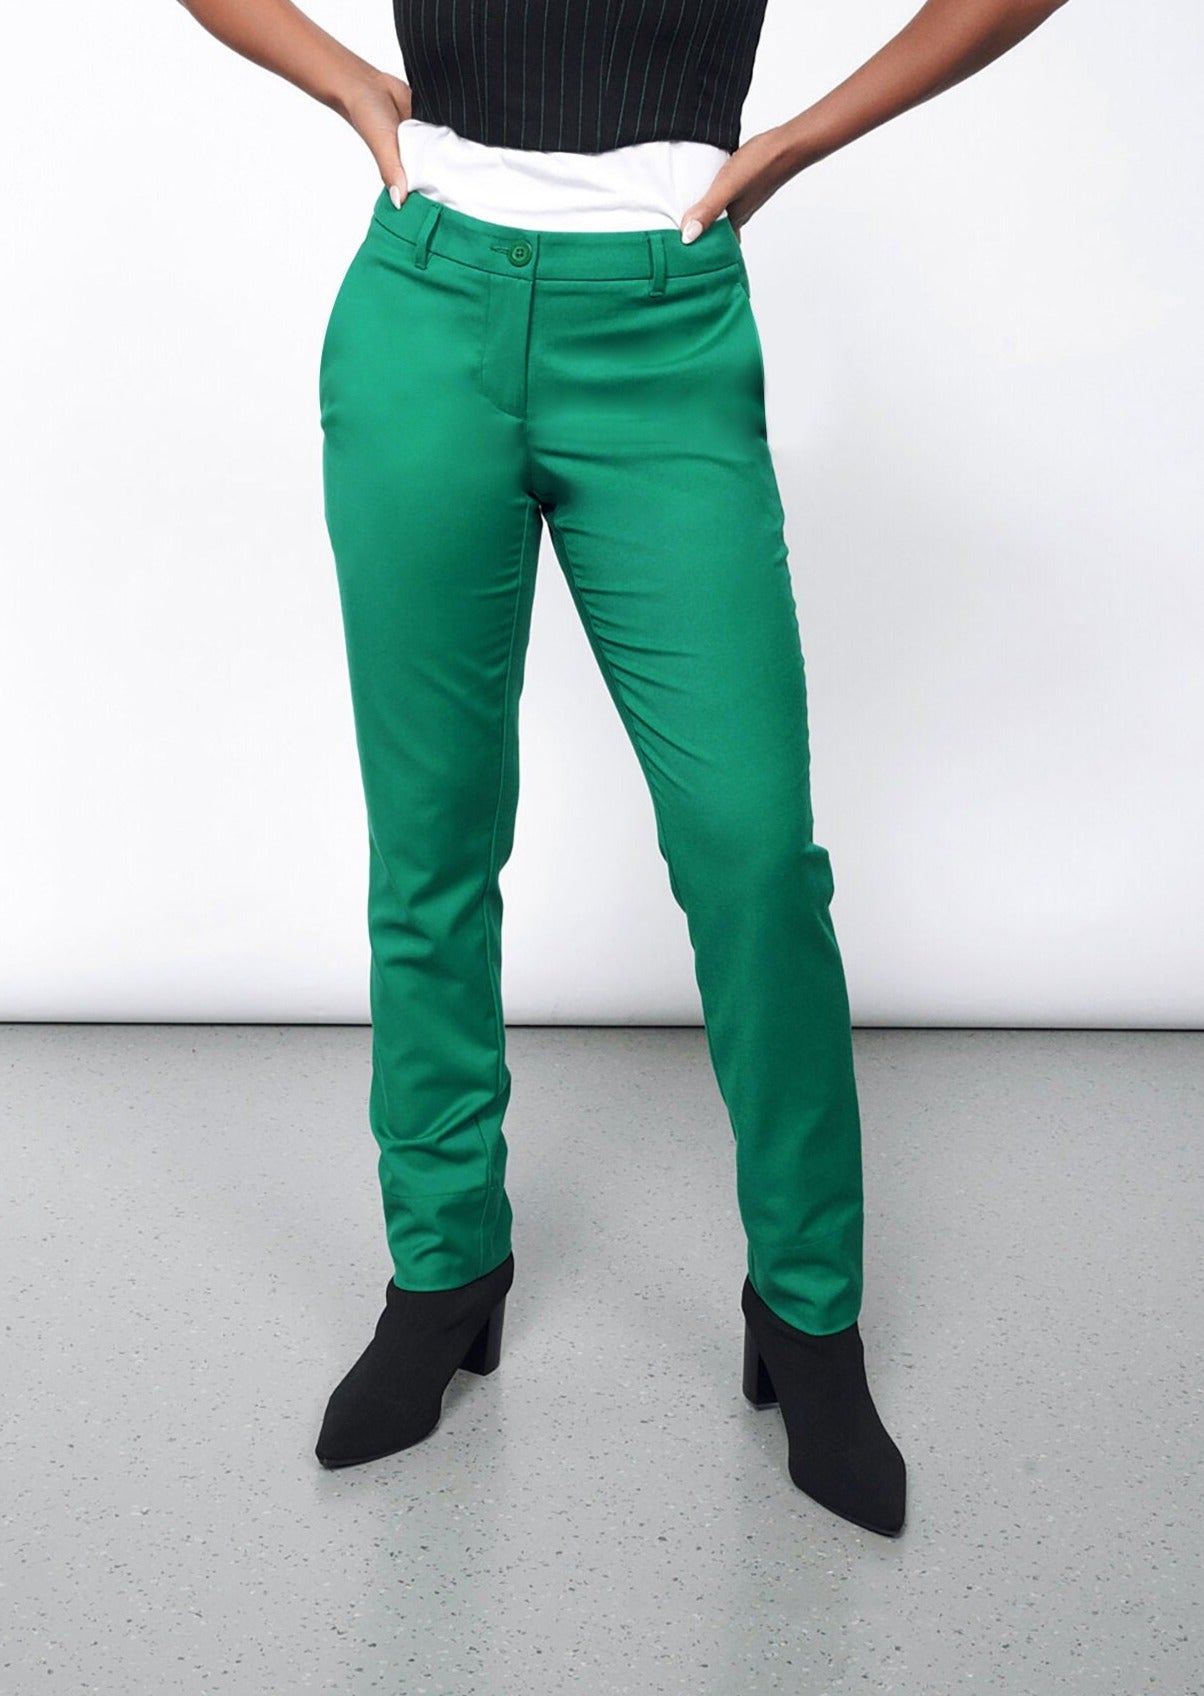 Work Hard Play Hard Trousers - Forest Green | MT LUXE – Maven Thread